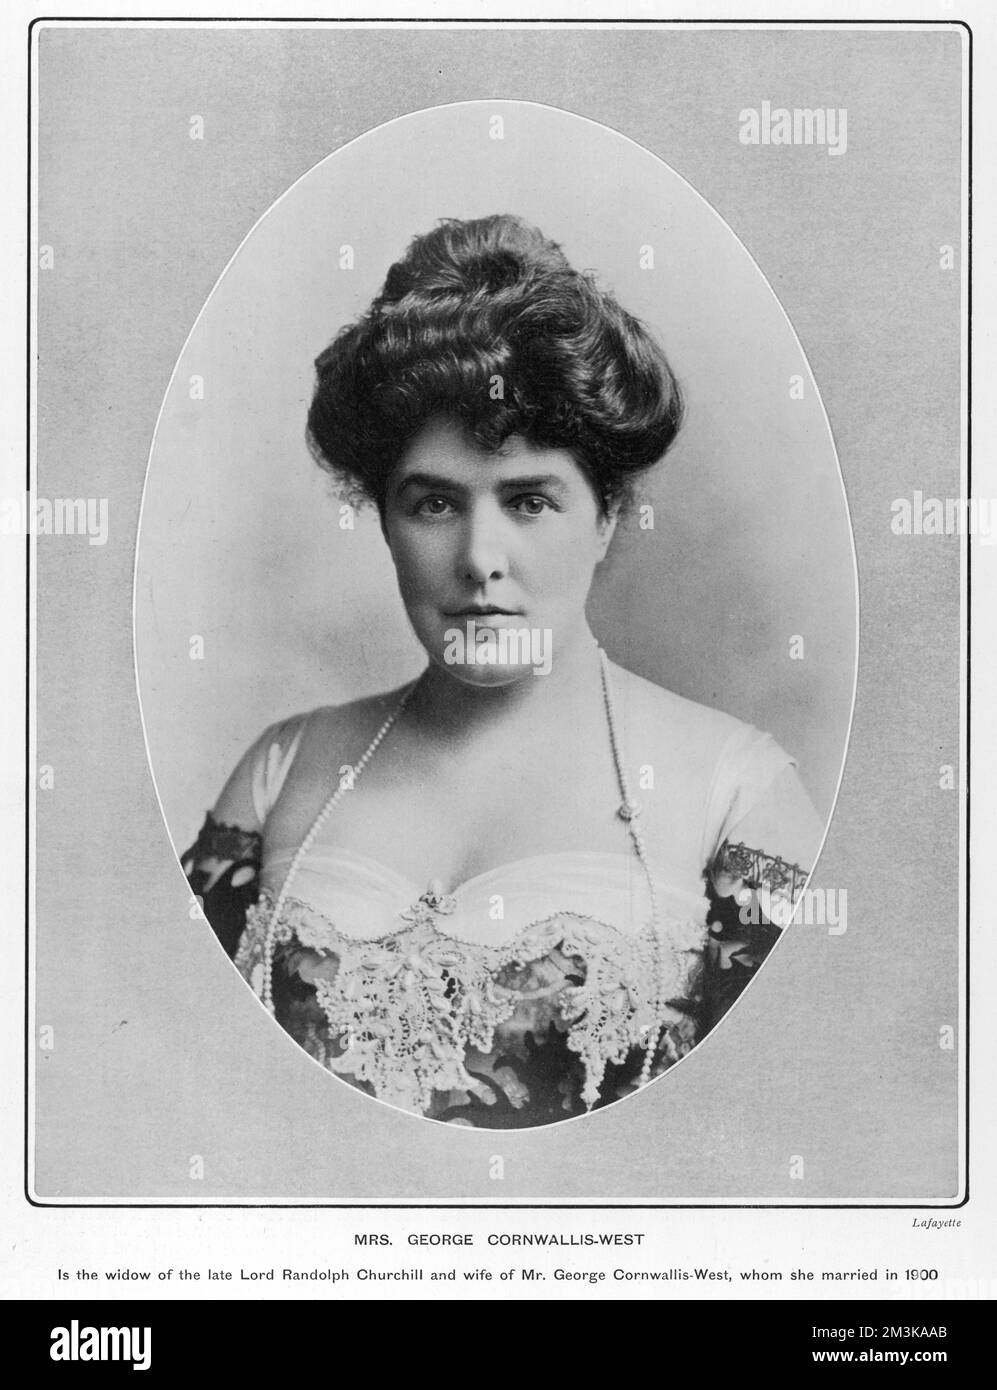 JENNIE JEROME, formerly Lady  Randolph Churchill and mother  of Winston, pictured in 1902  when she was married to George  Cornwallis West.      Date: 1854 - 1921 Stock Photo